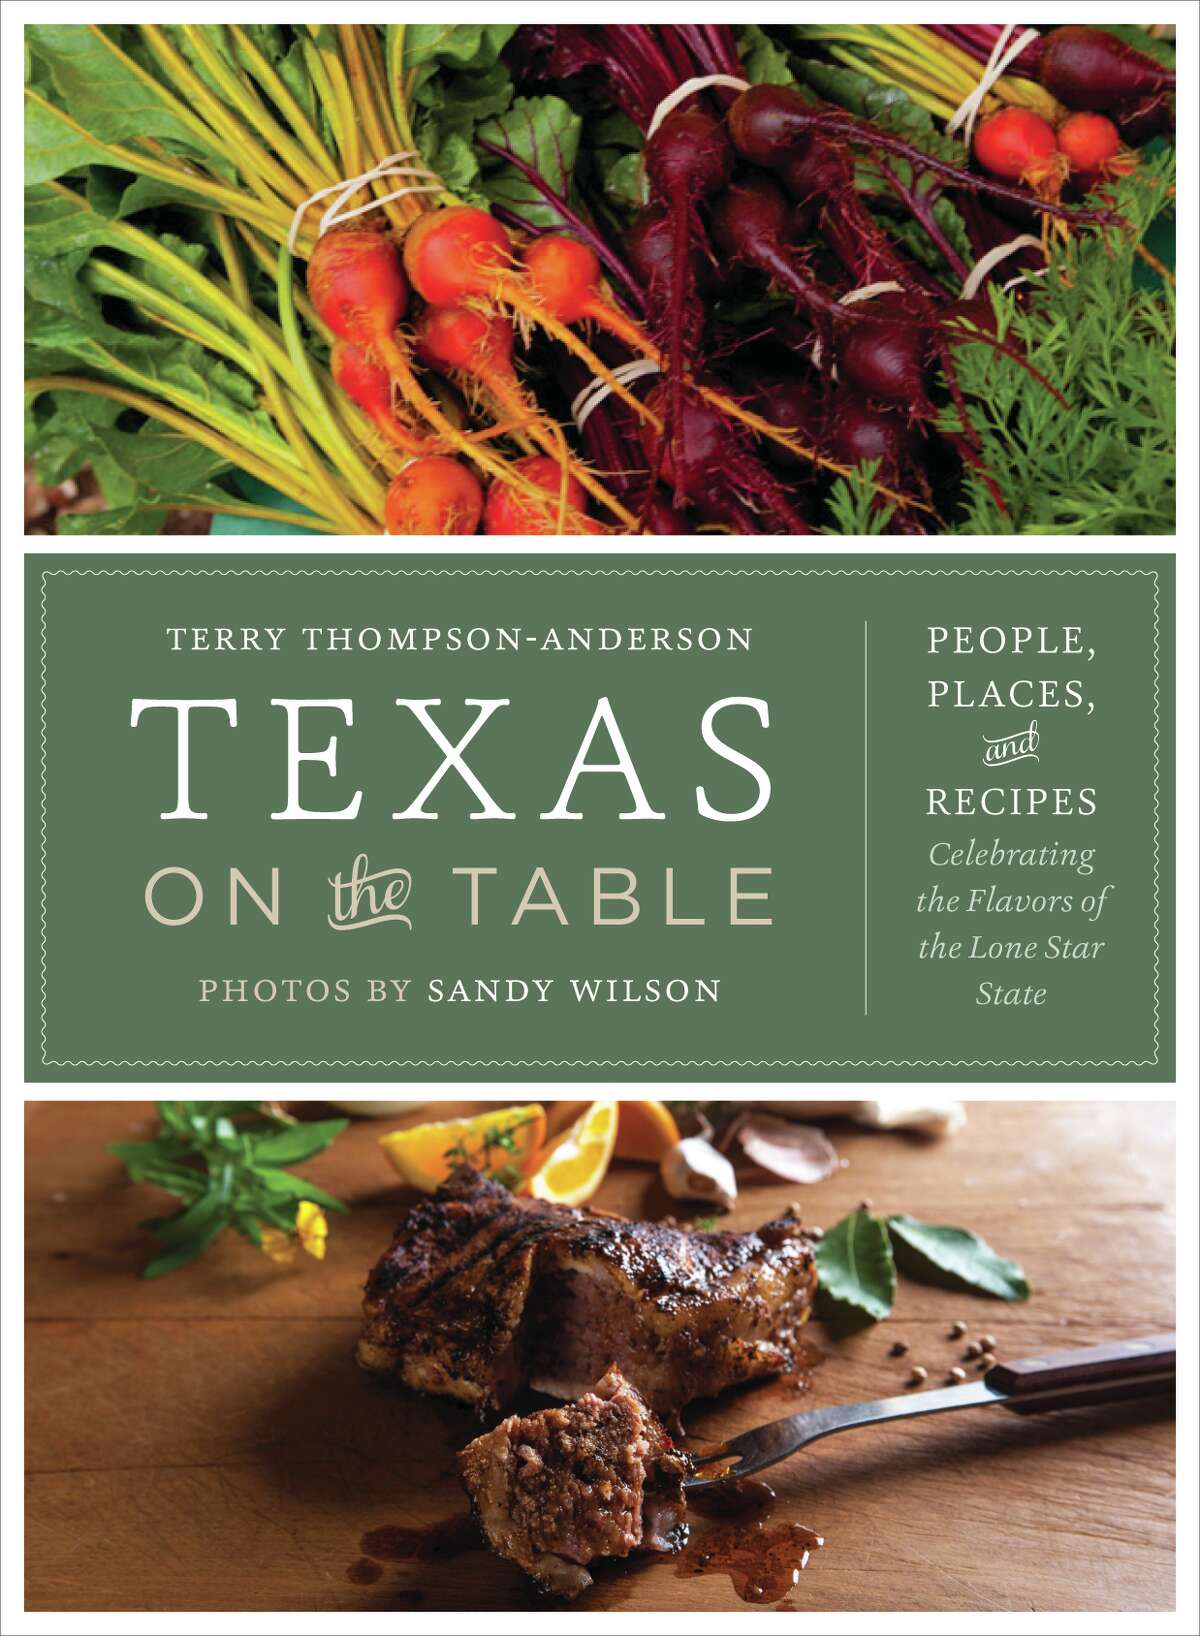 "Texas on the Table: People, Places and Recipes Celebrating the Flavors of the Lone Star State," by Terry Thompson-Anderson, is a finalist for "Cookbook of the Year" from the James Beard Foundation.